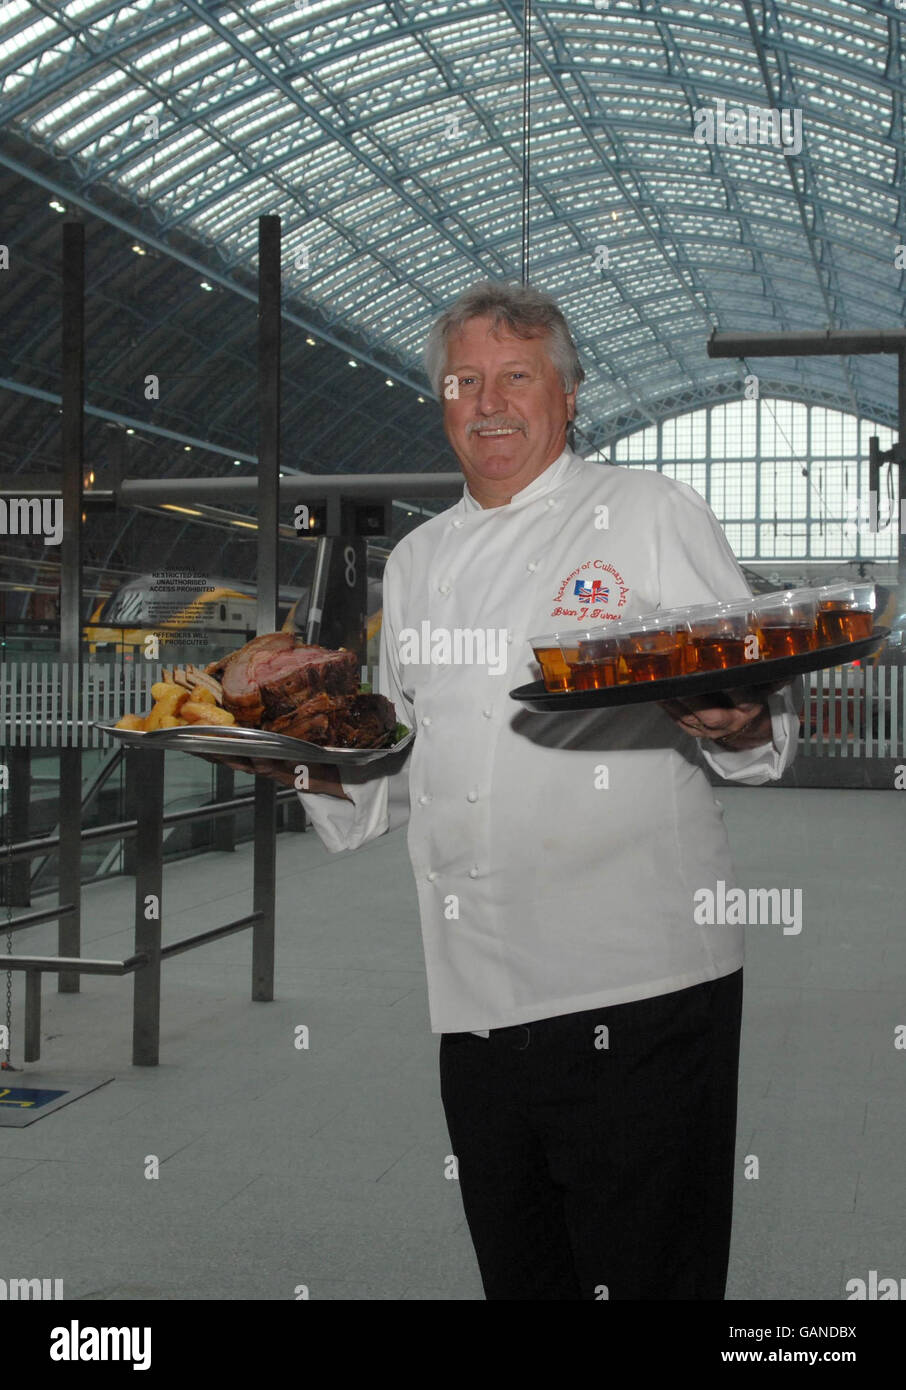 Celebrity chef Brian Turner at St. Pancras International Station, London, welcoming commuters from France with roast beef as part of St George's Day celebrations. Stock Photo